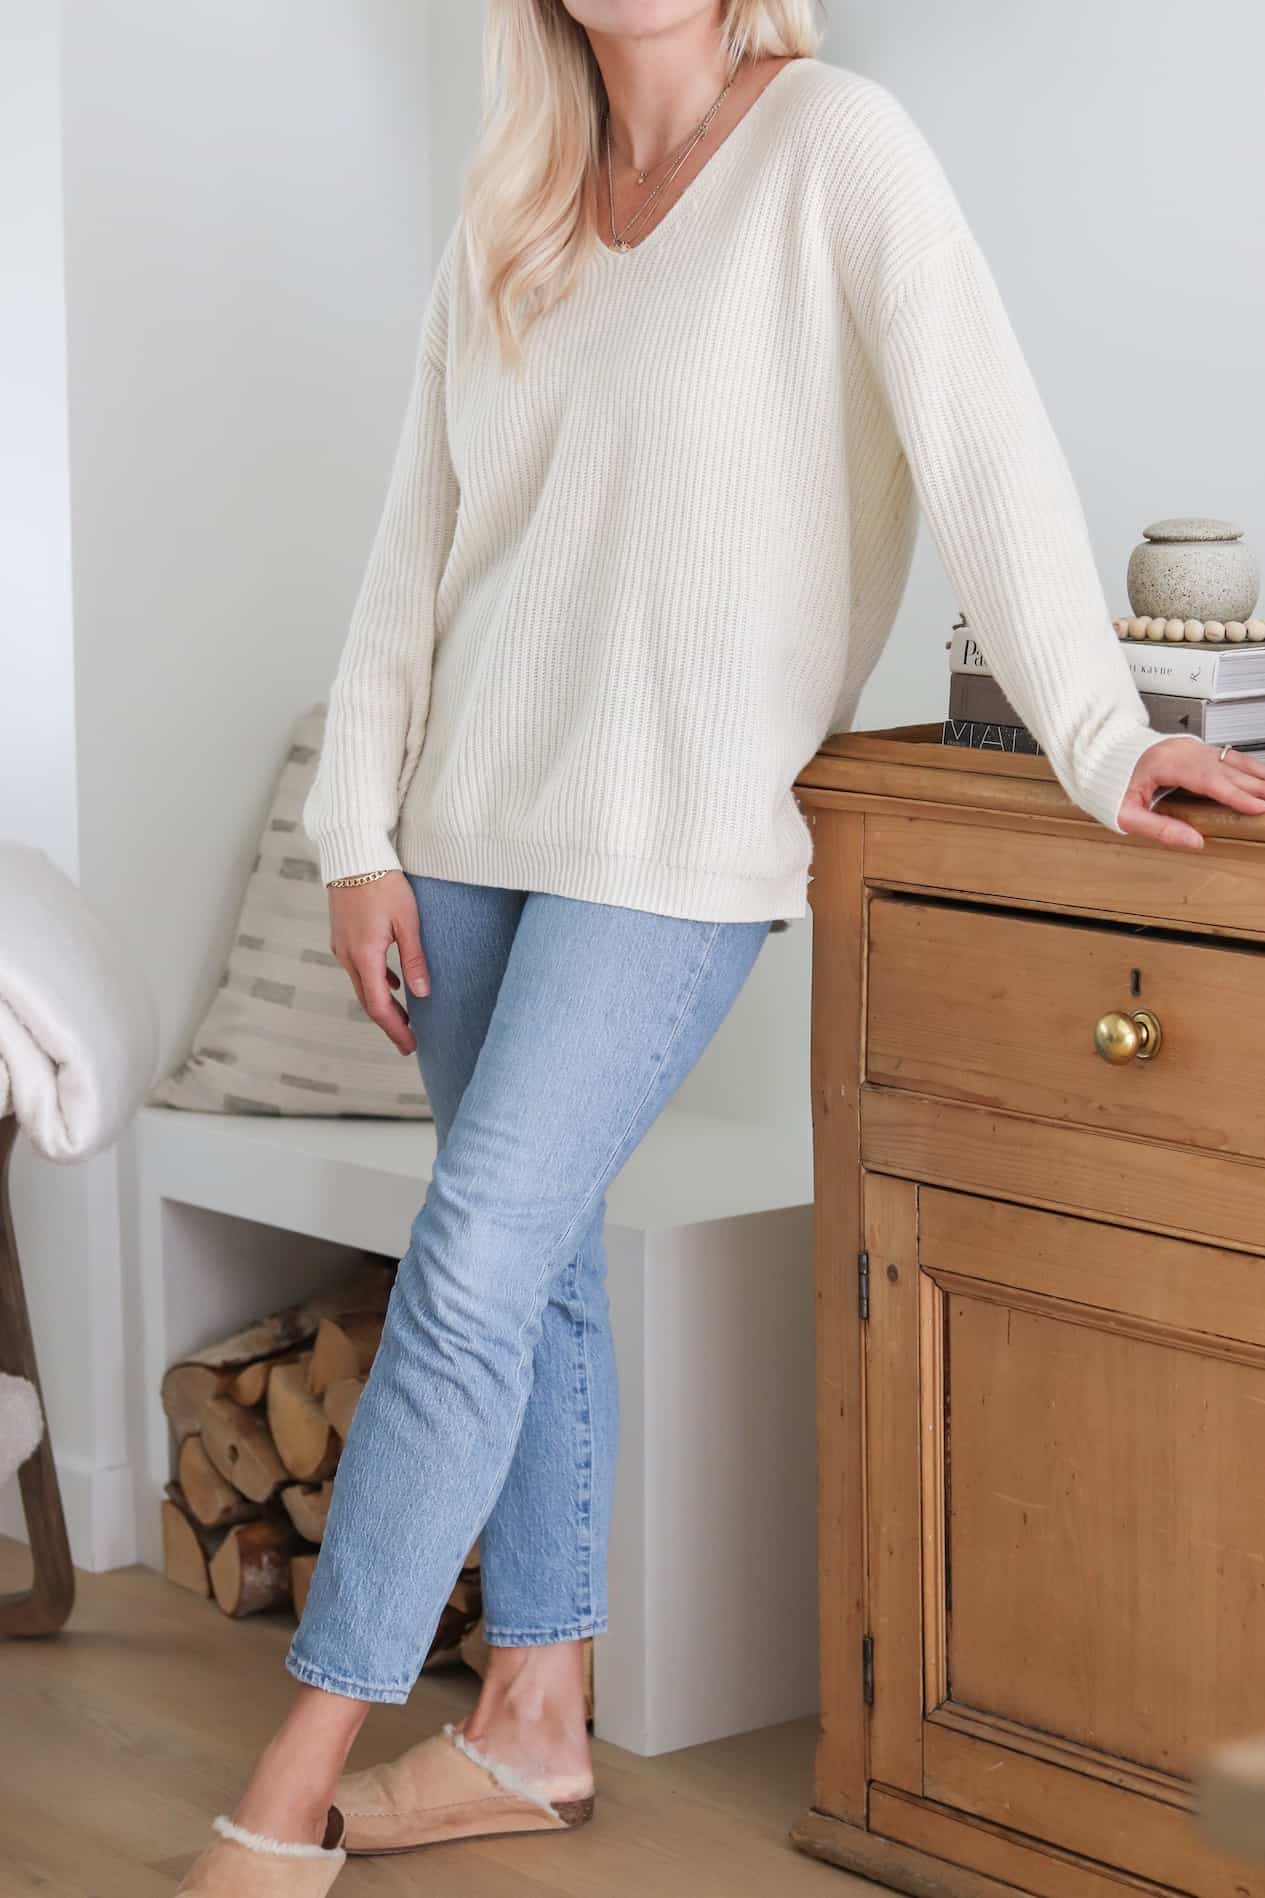 Woman wearing jeans, slippers and a cream colored sweater.